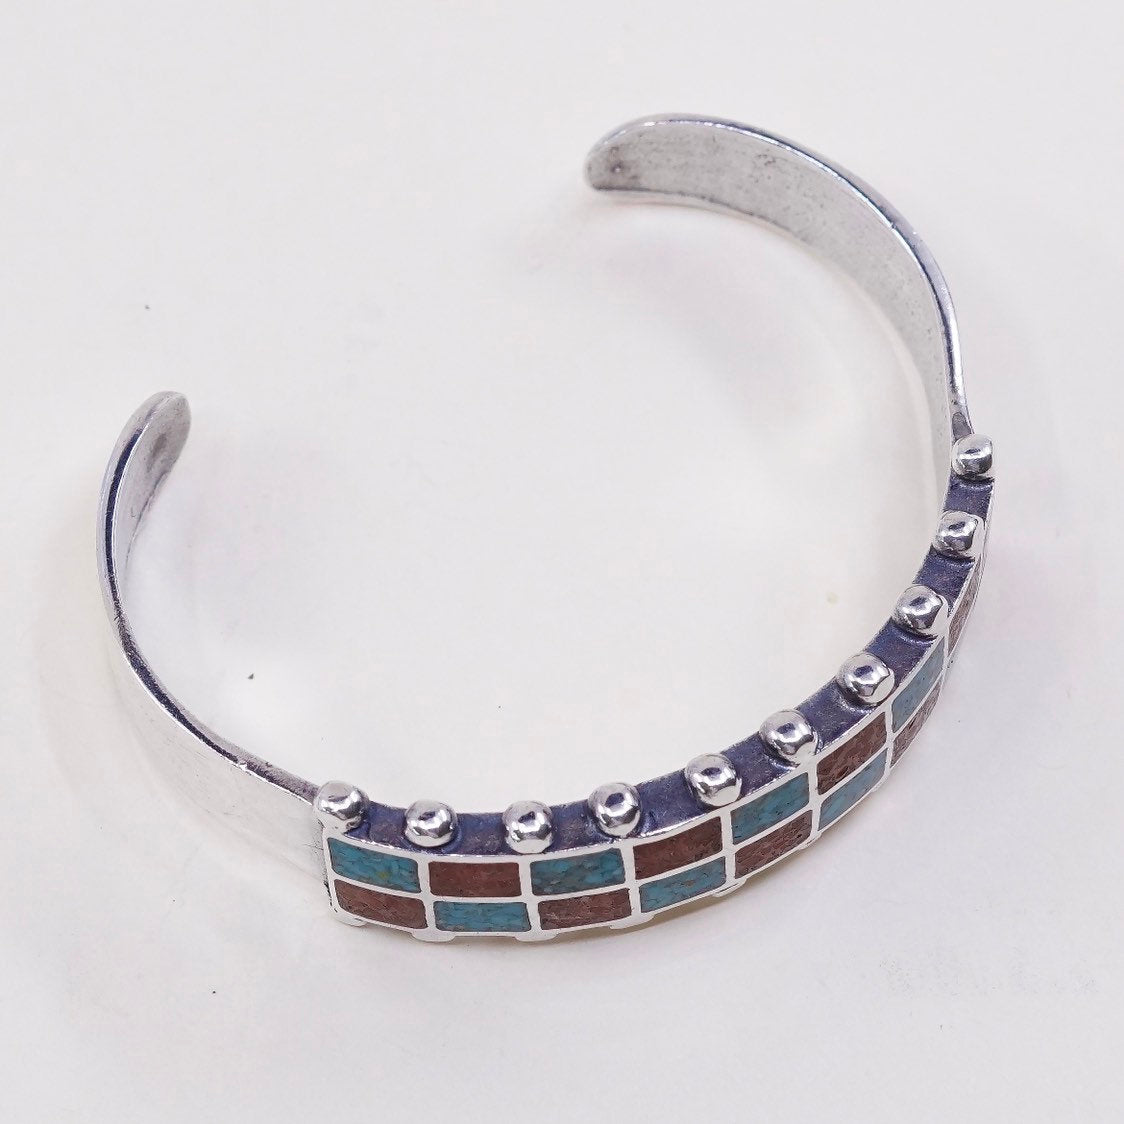 6.5", VTG mexico sterling silver cuff w/ turquoise and coral, handmade bracelet